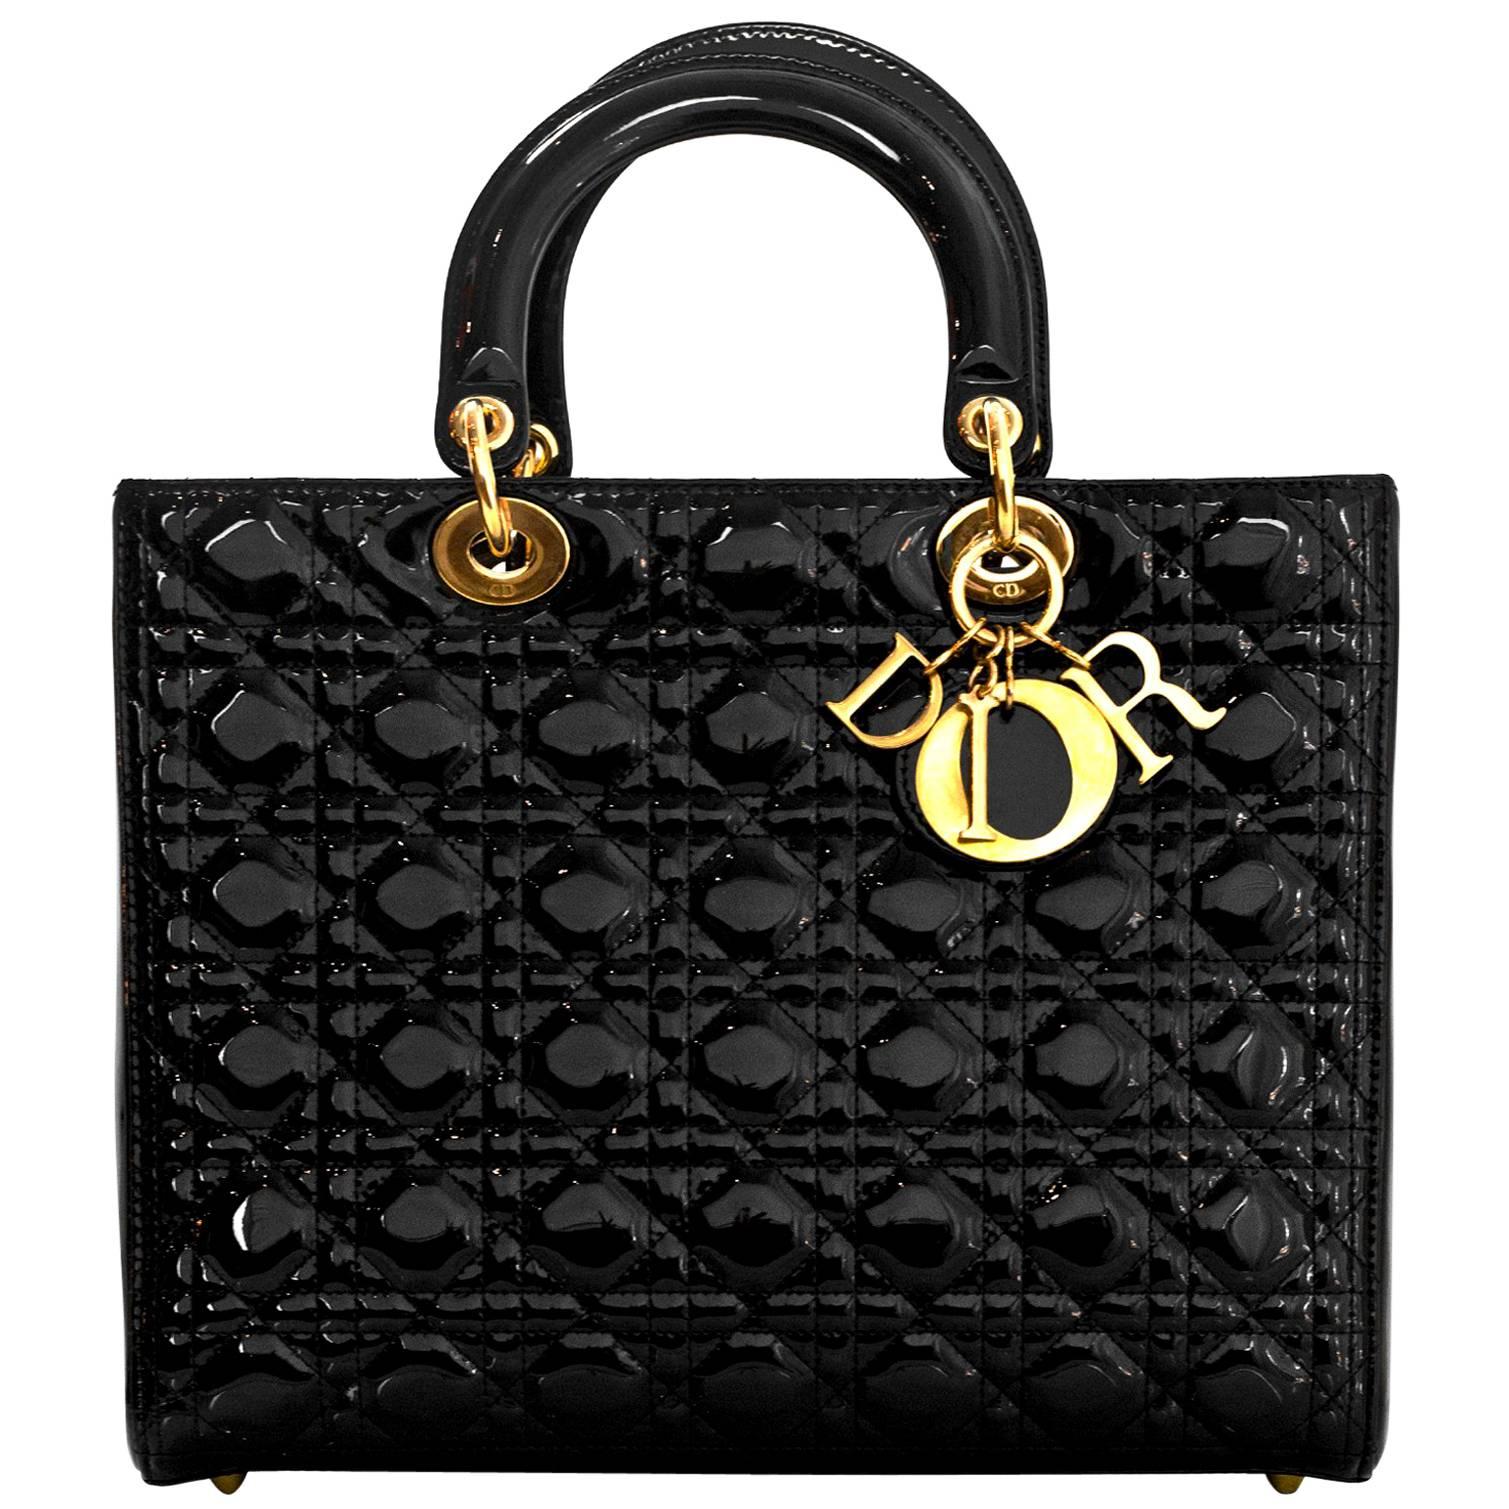 Christian Dior Black Patent Leather Cannage Quilted Large Lady Dior Bag